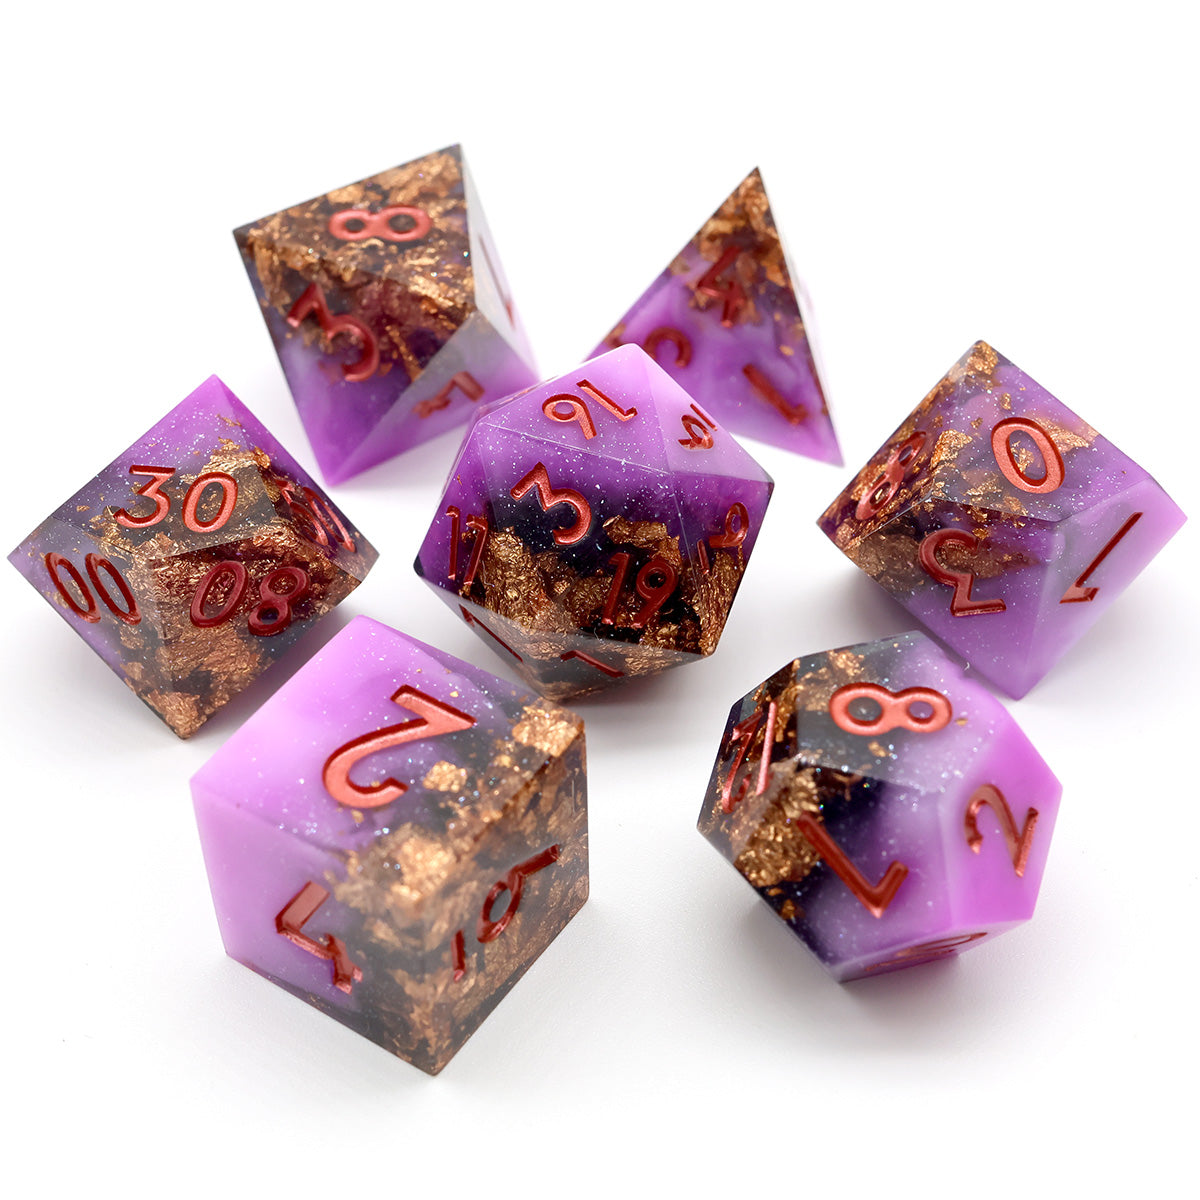 sharp edge dnd TTRPG dice sets for role playing games and dice goblin collectors